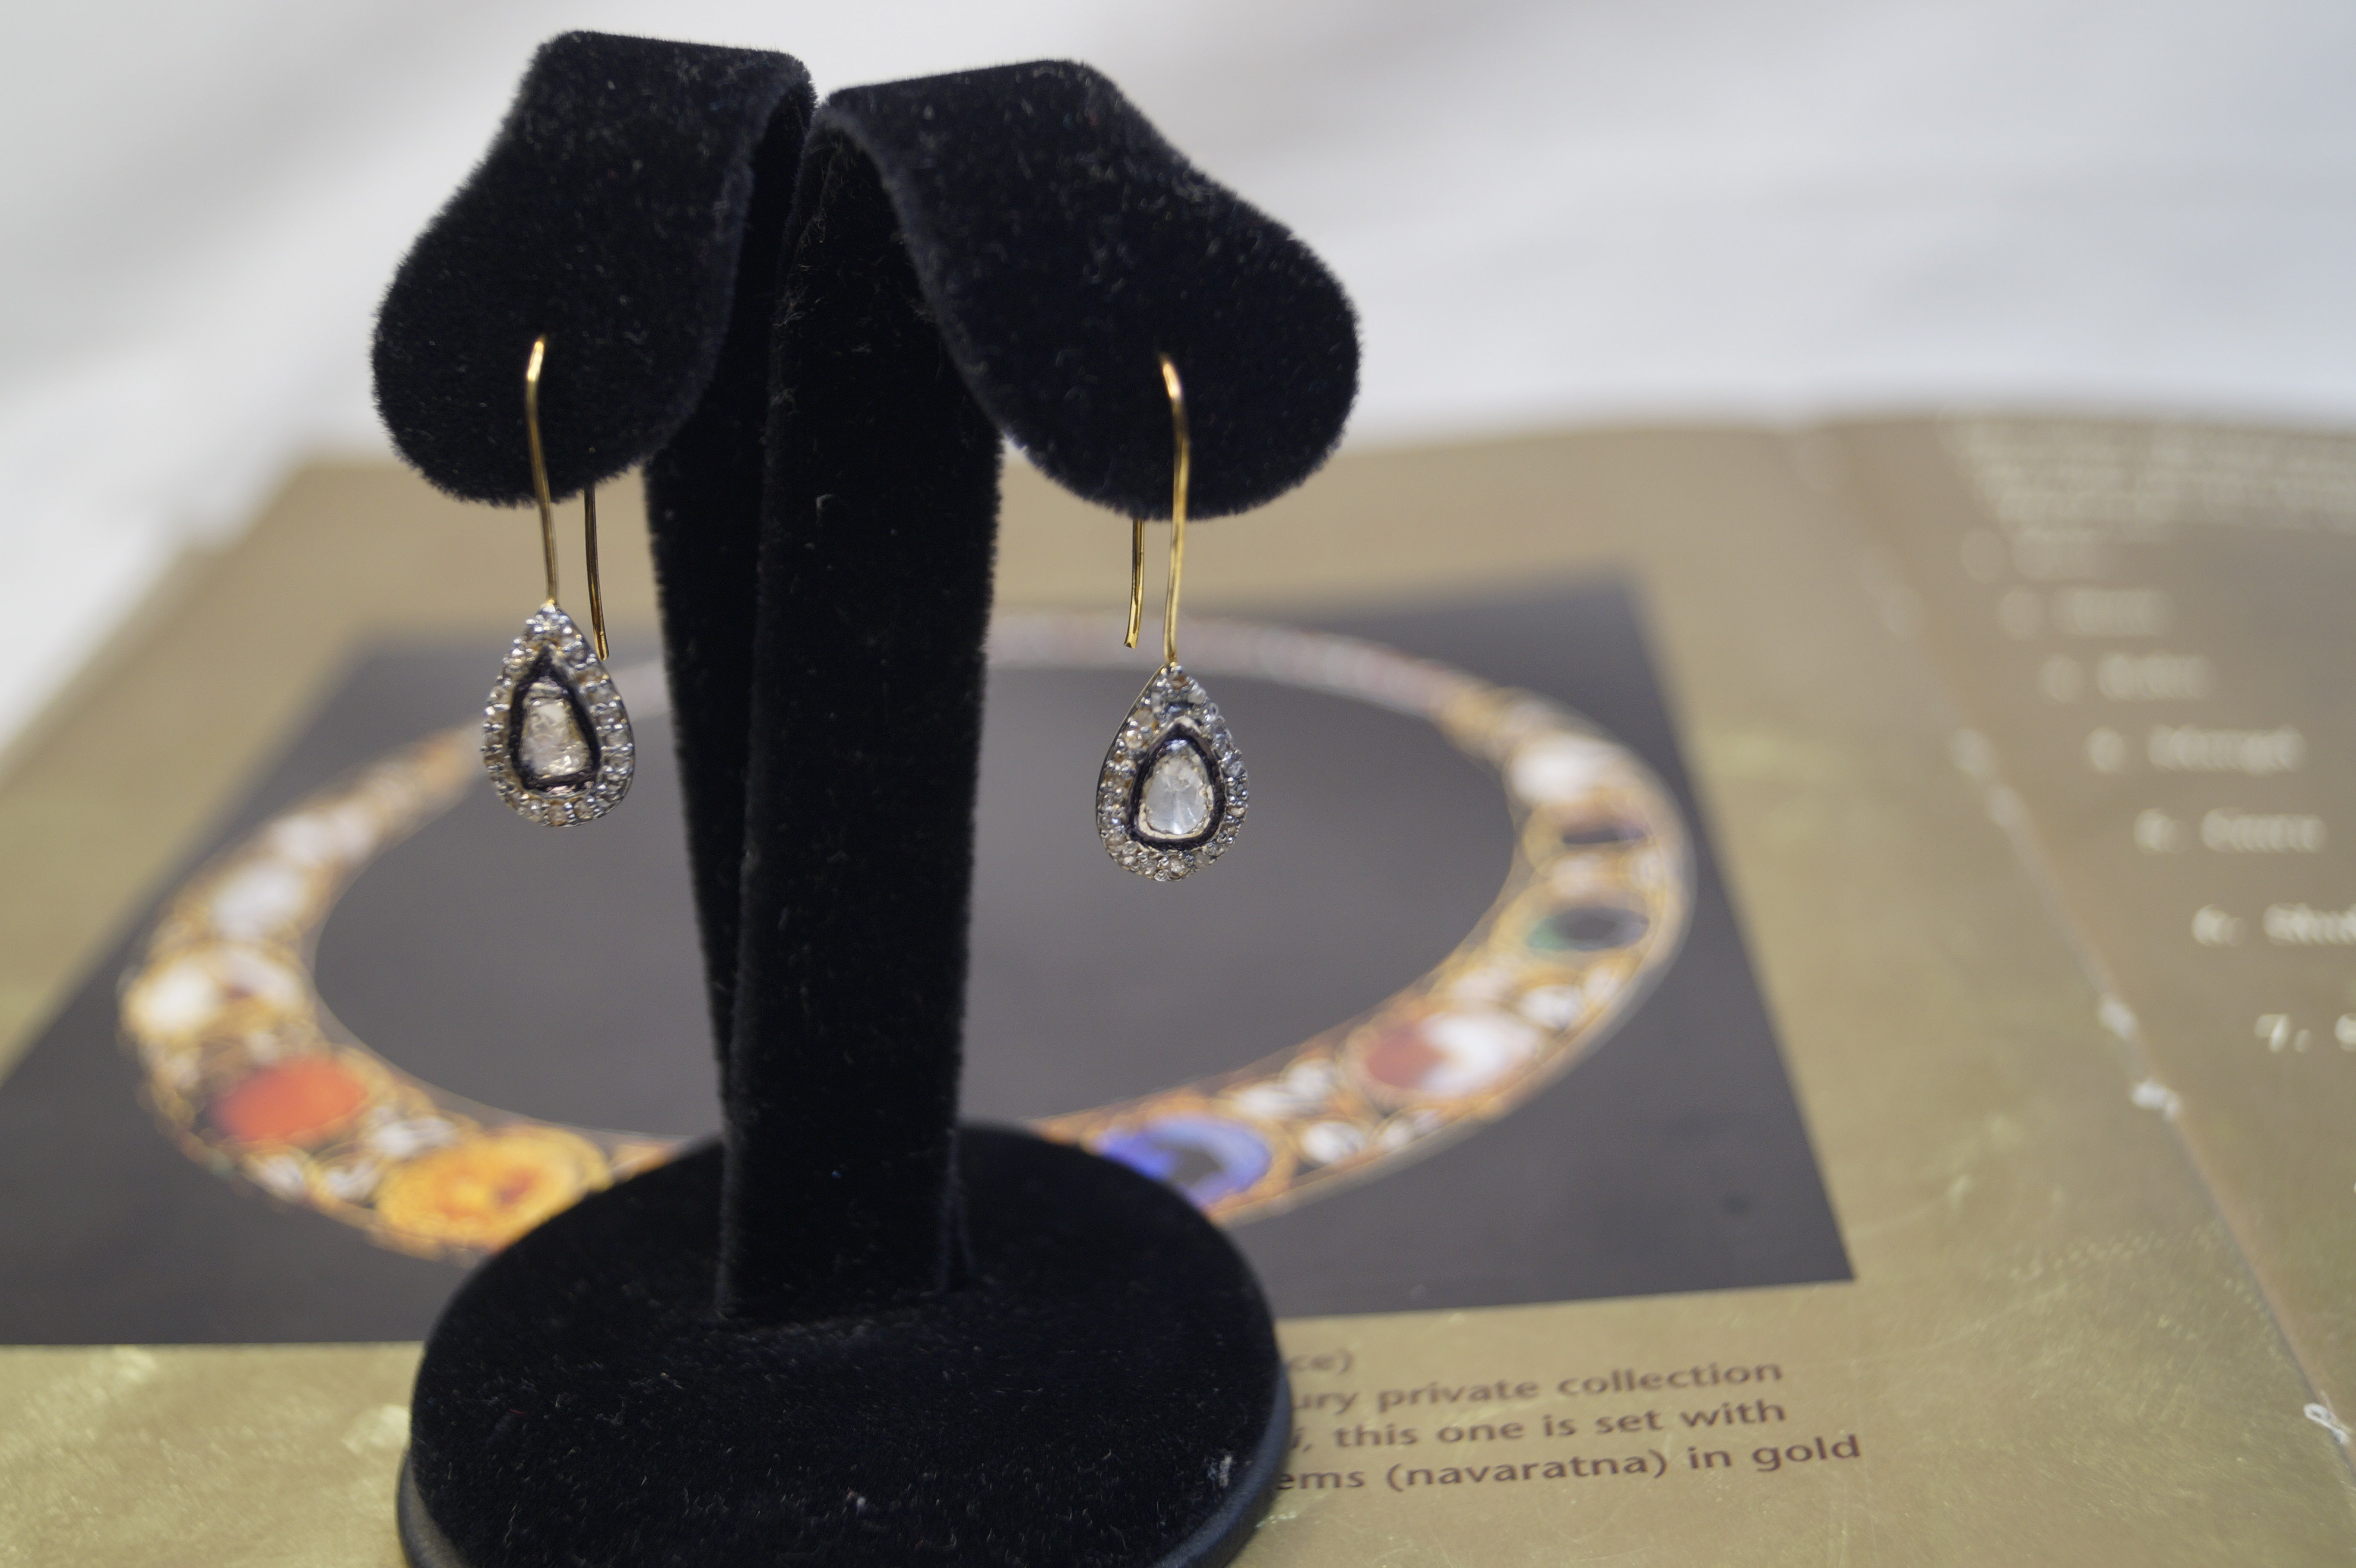 The beautiful elegant natural uncut diamond sterling silver drop wire earrings consists of-

Diamond type- Natural pave diamonds
Diamond color- White with a tint of grey
Diamond weight- 1.50cts 

Metal- sterling silver
Metal color- oxidized silver